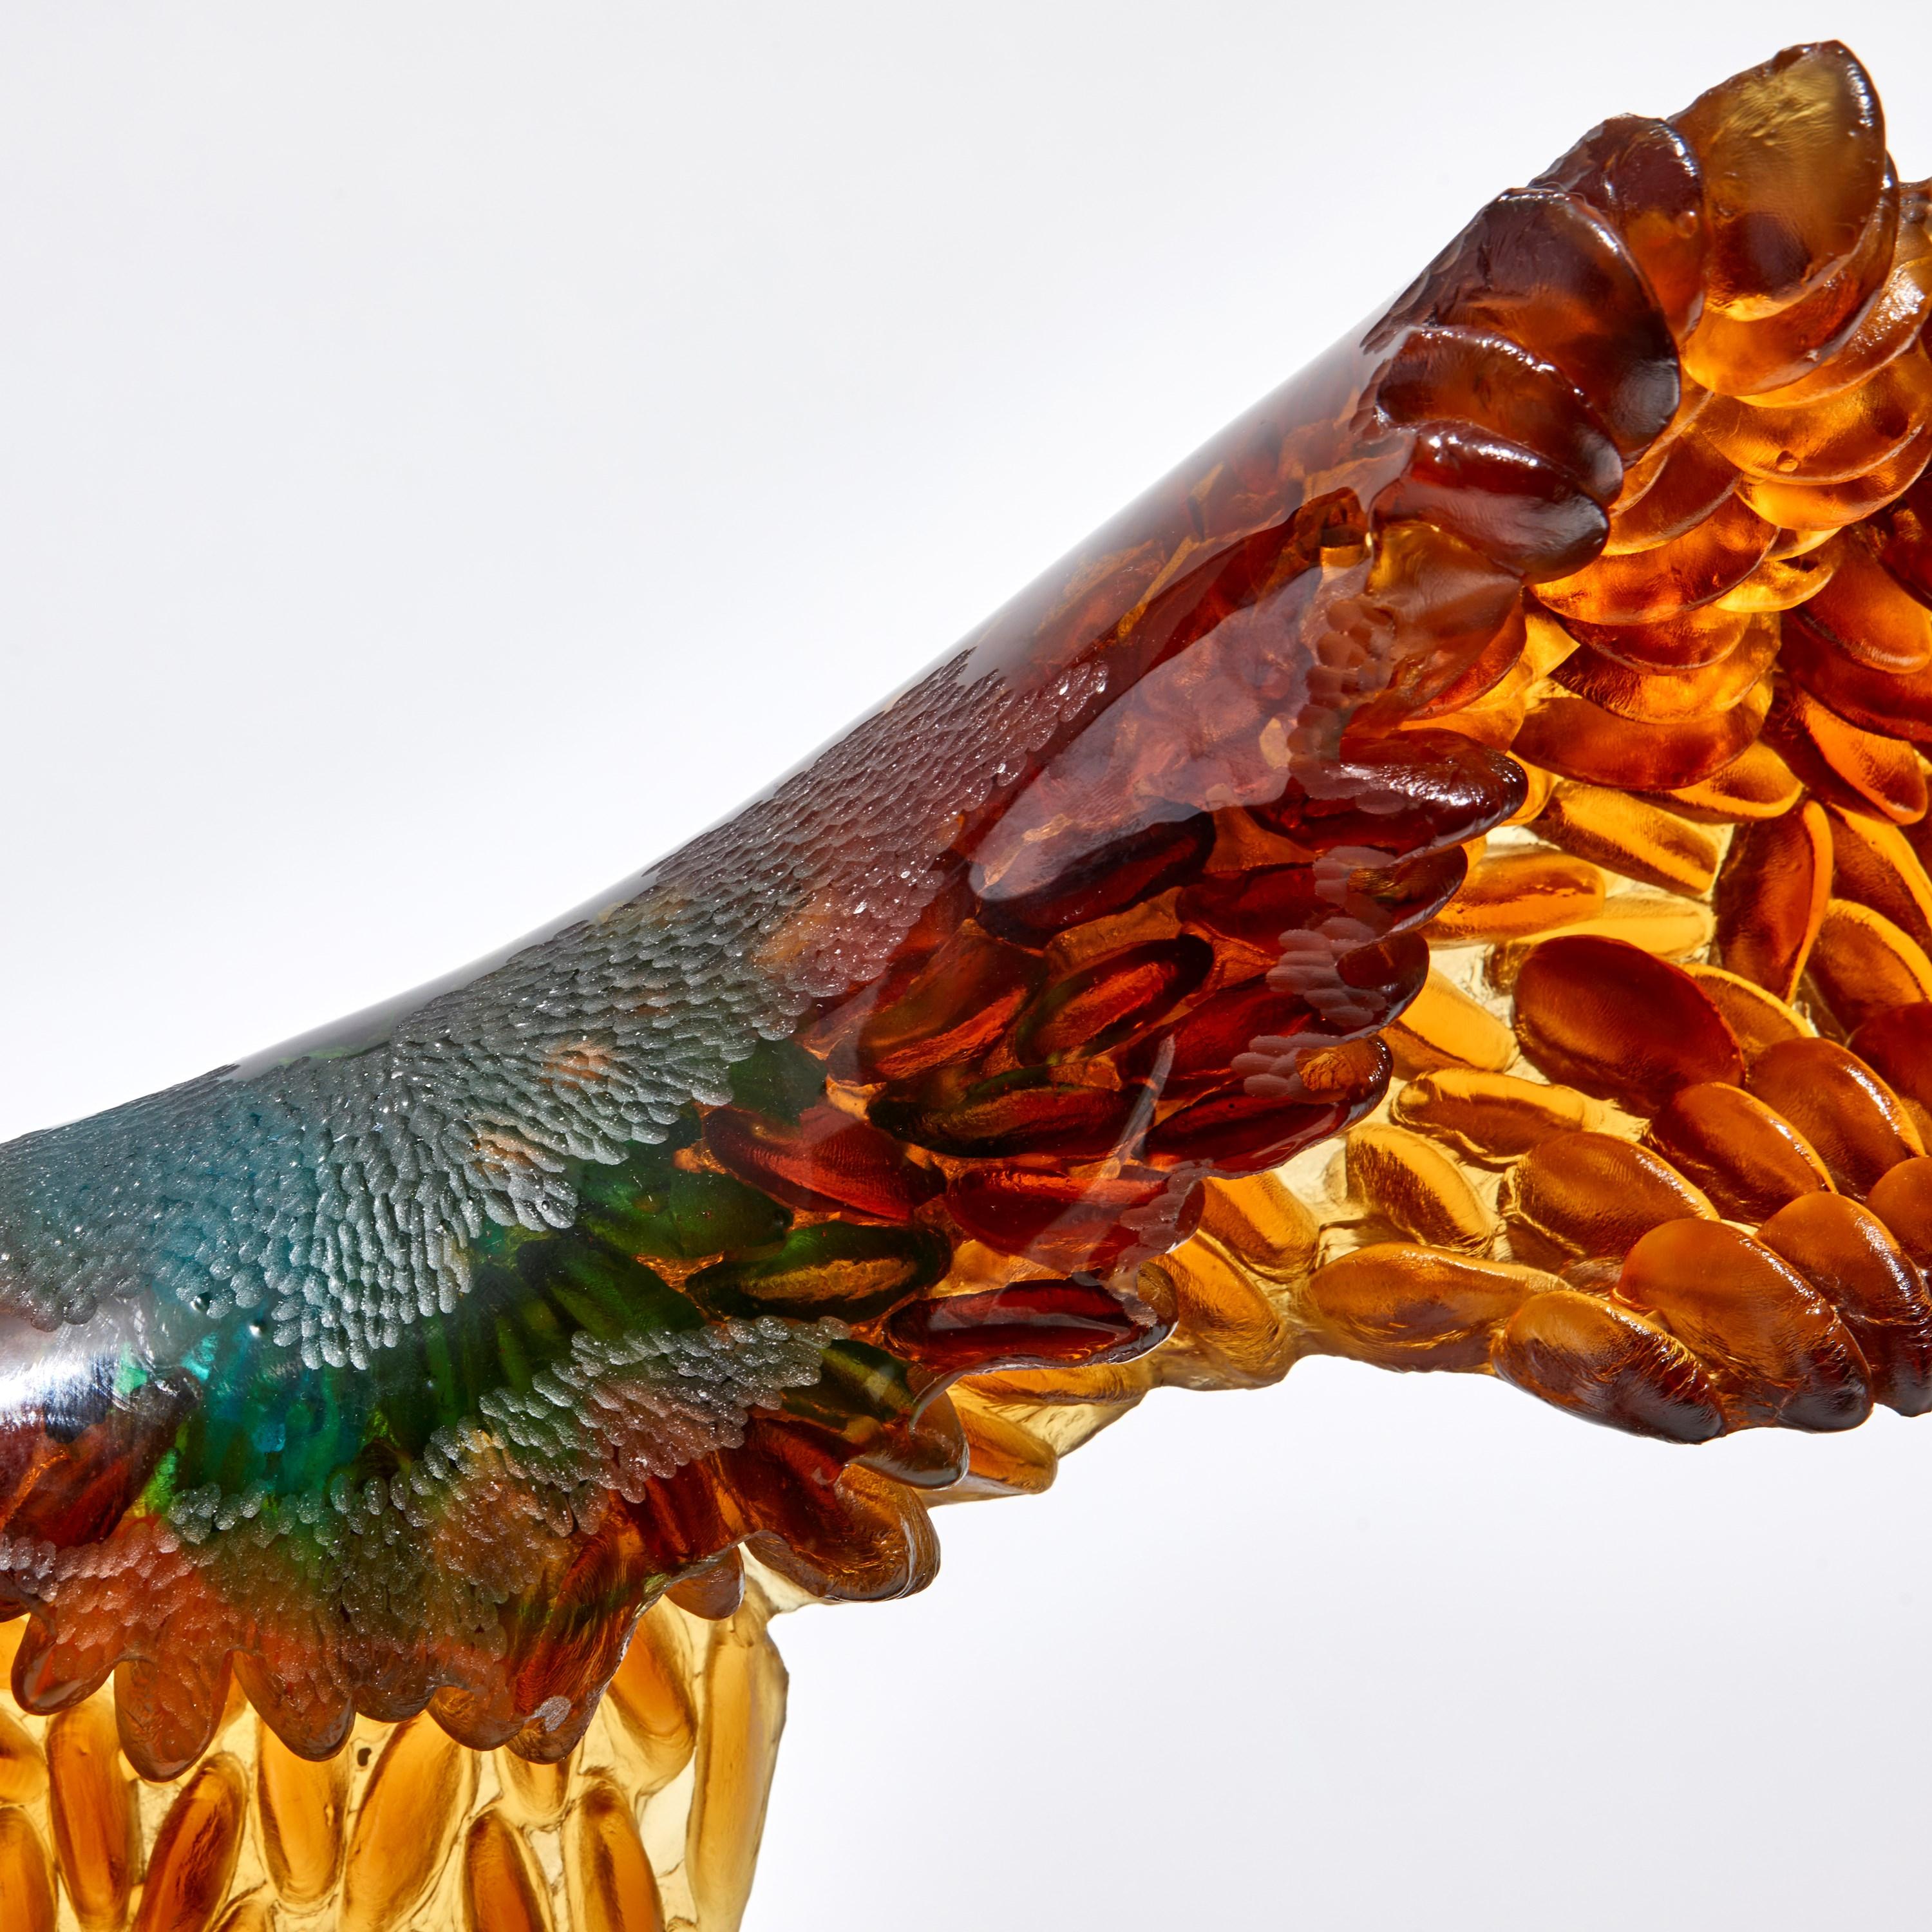 Hand-Crafted Kelp, a Unique Amber, Aqua & Green Cast Glass Sculpture by Nina Casson McGarva For Sale